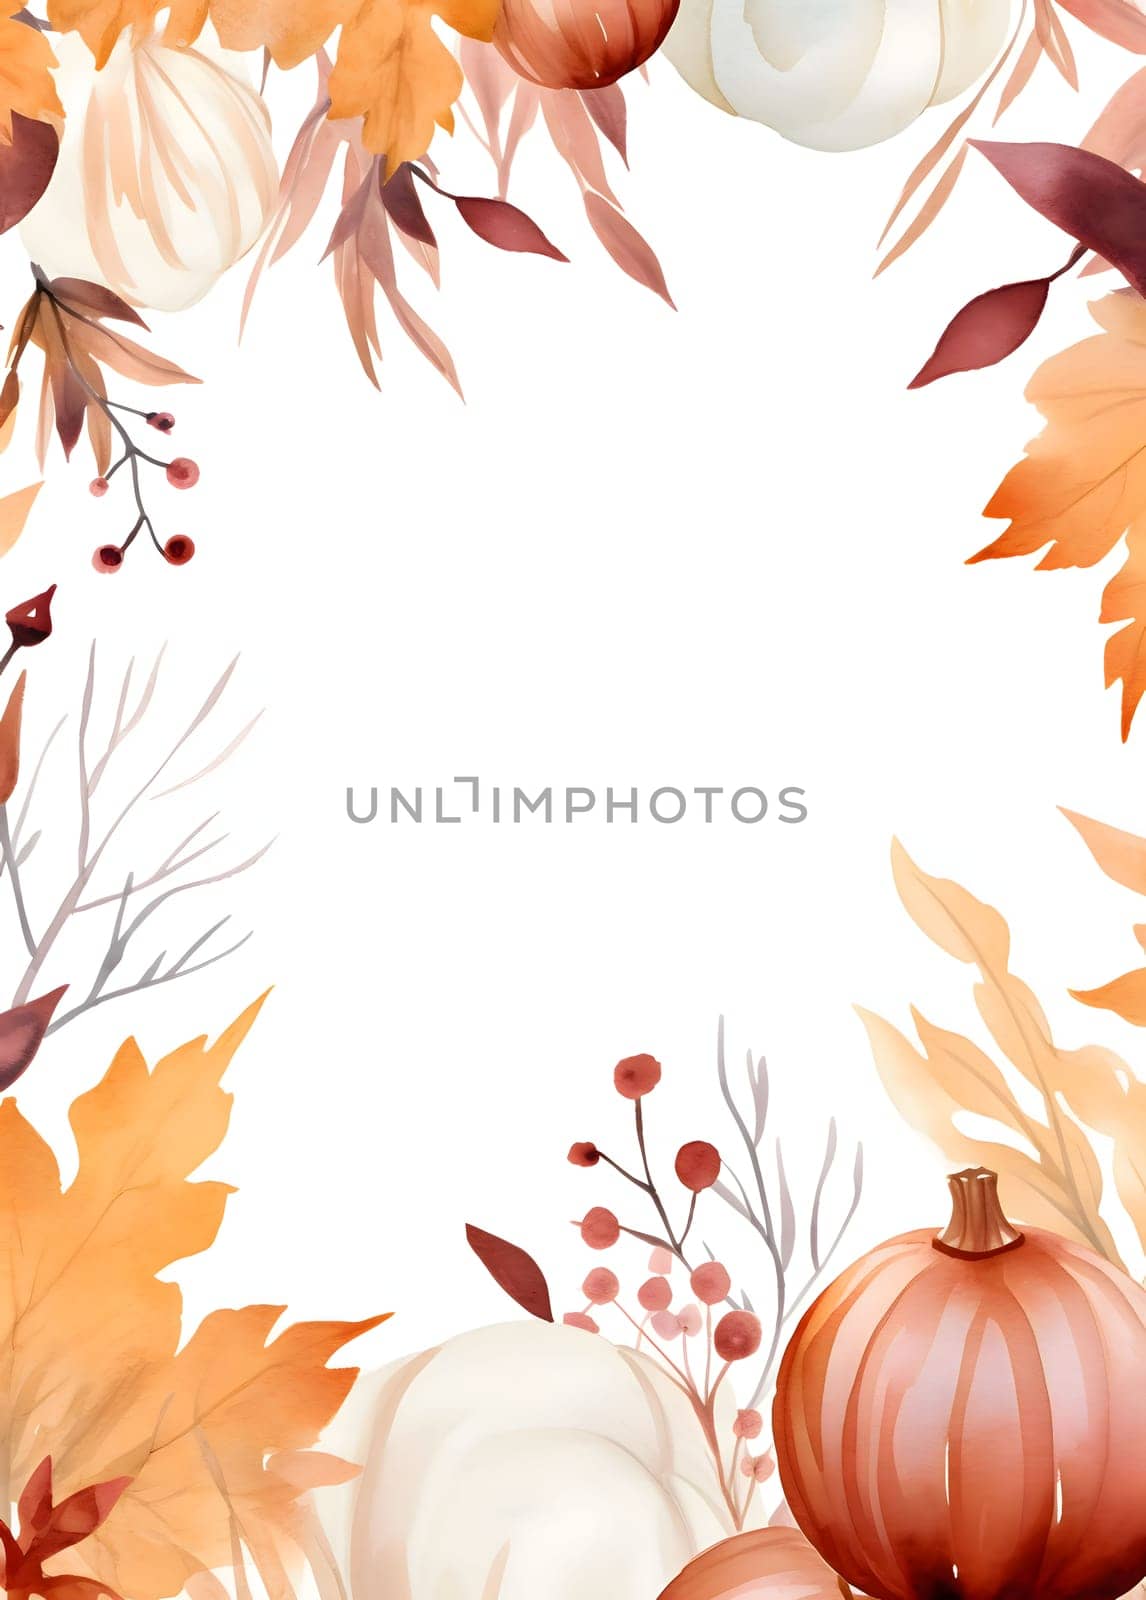 Mother and child around turkey, pumpkins and autumn leaves. Pumpkin as a dish of thanksgiving for the harvest, picture on a white isolated background. An atmosphere of joy and celebration.